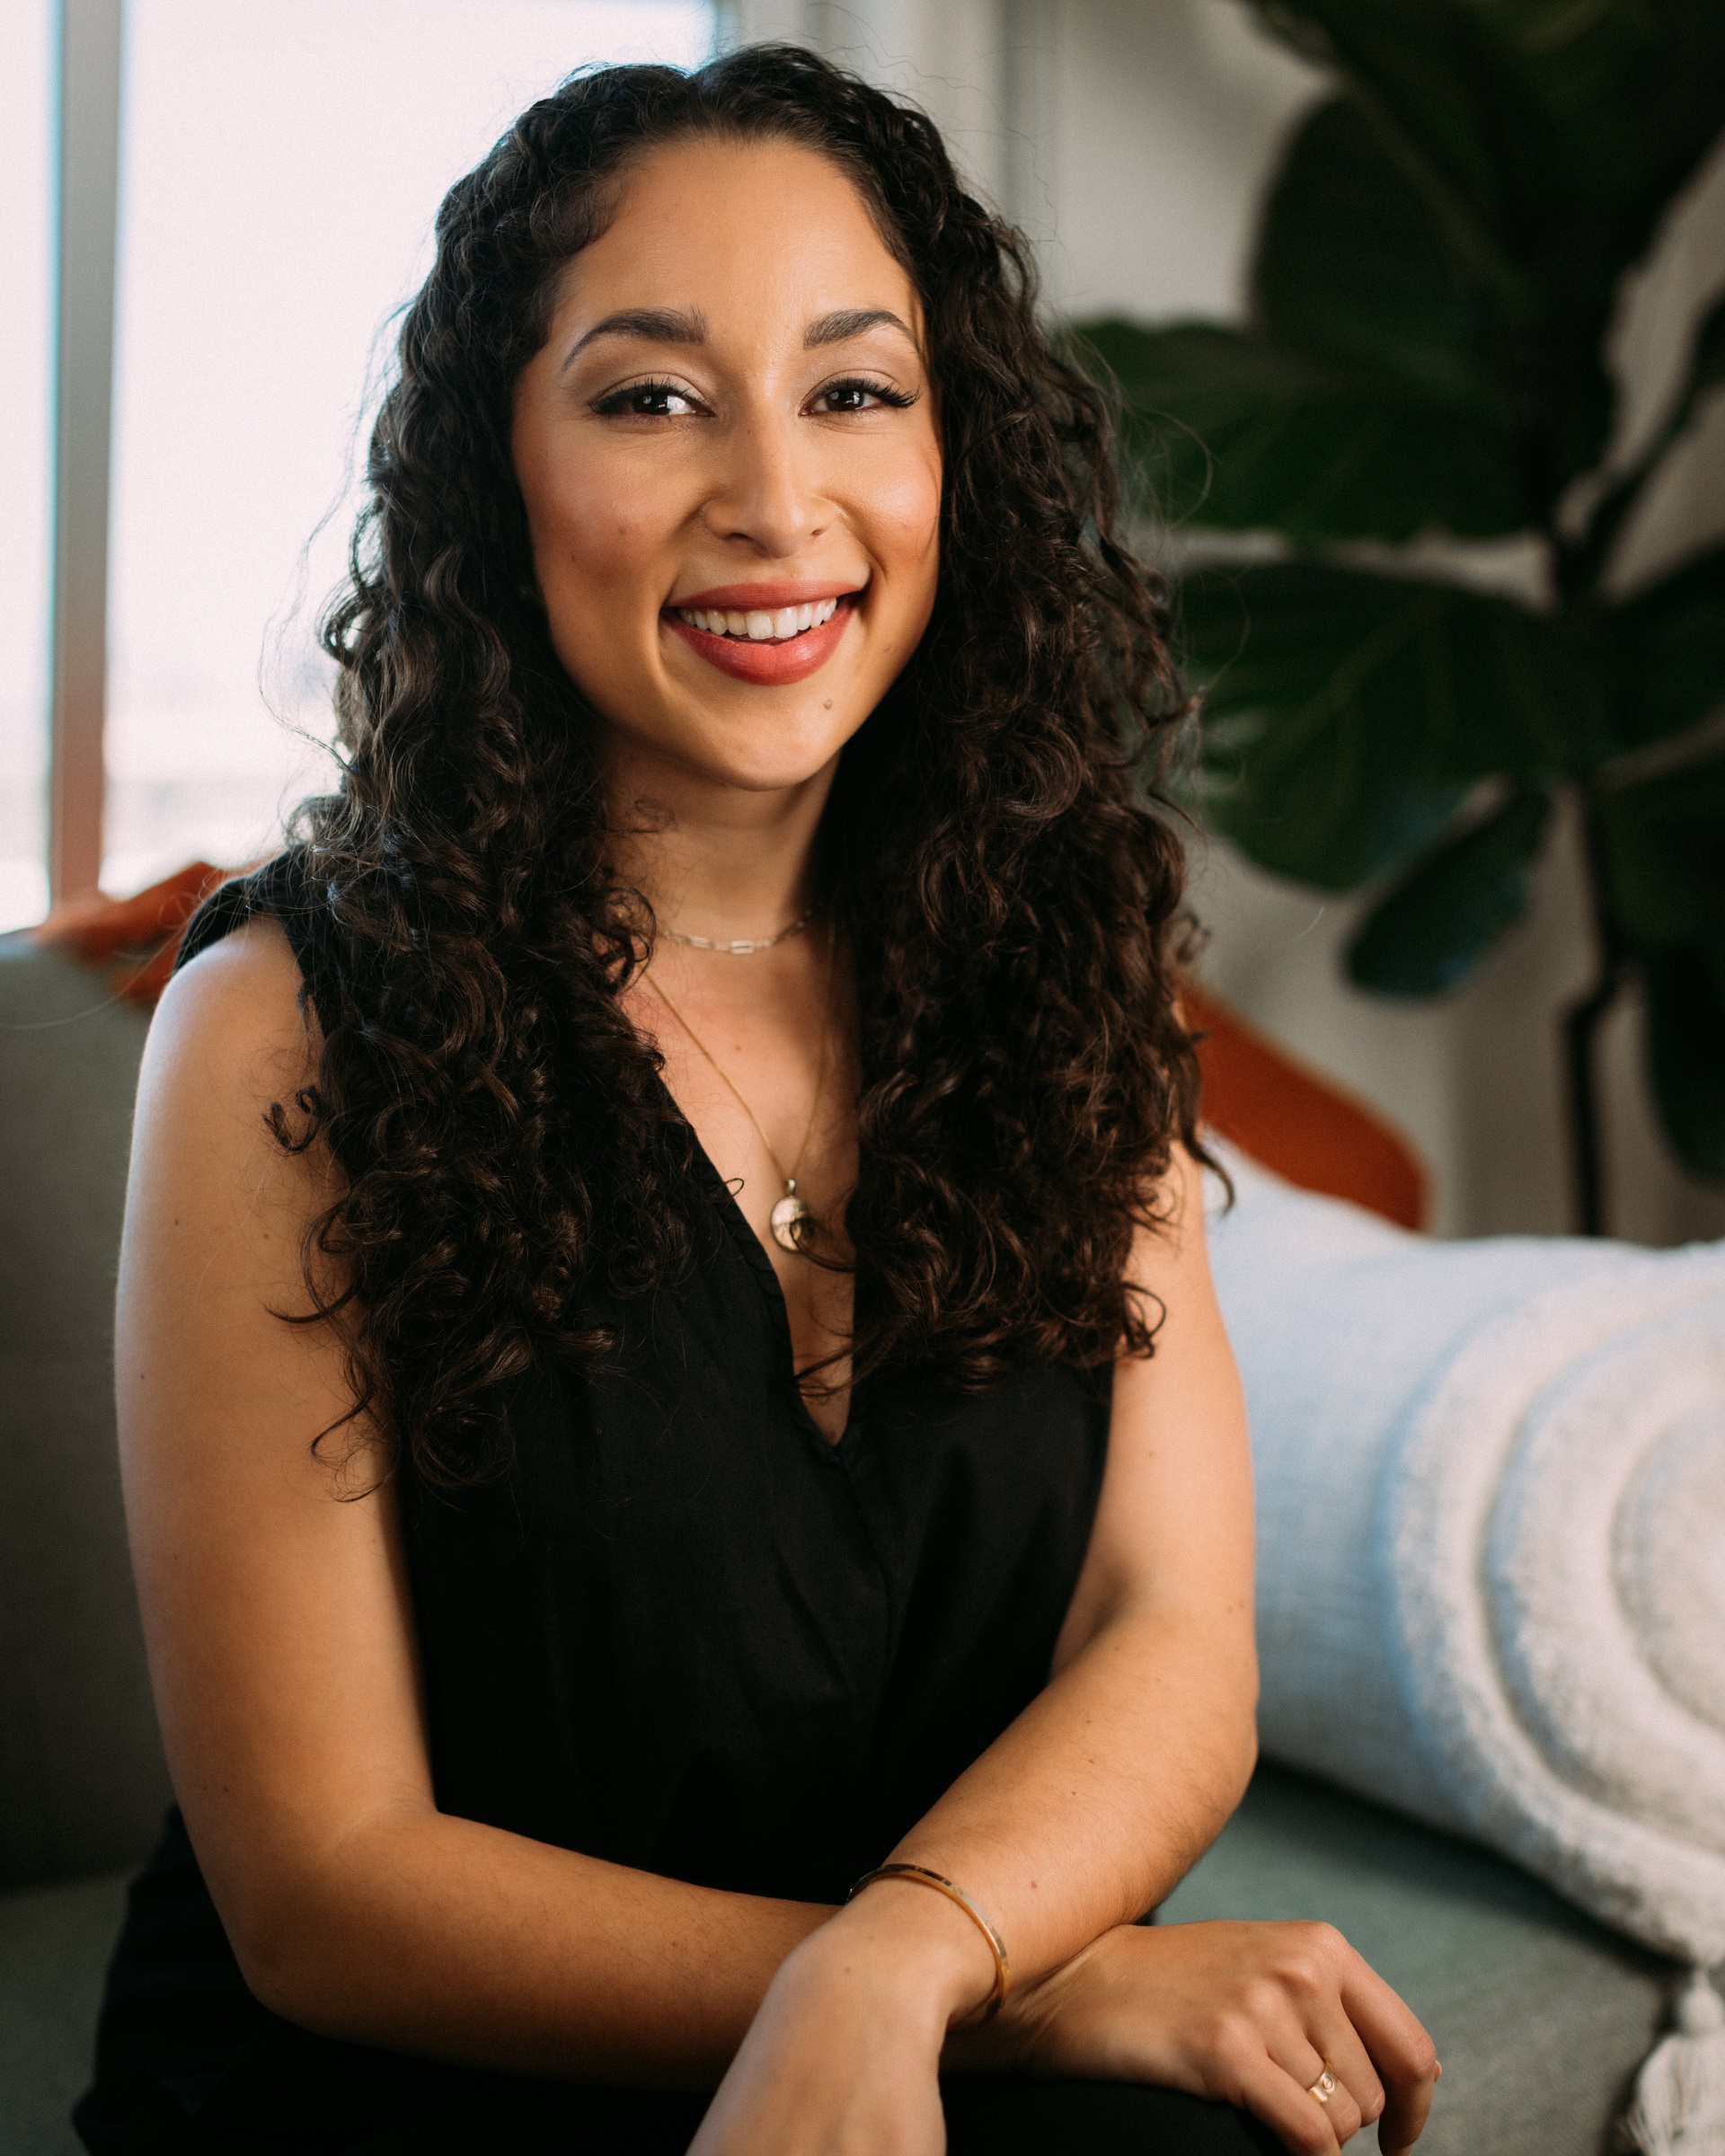 A woman smiles from a gray sofa. She has long, curly brown hair and a friendly face. She wears a gold necklace and a black, sleeveless dress. A happy, green house plant is positioned behind her and the light shines brightly on her face.